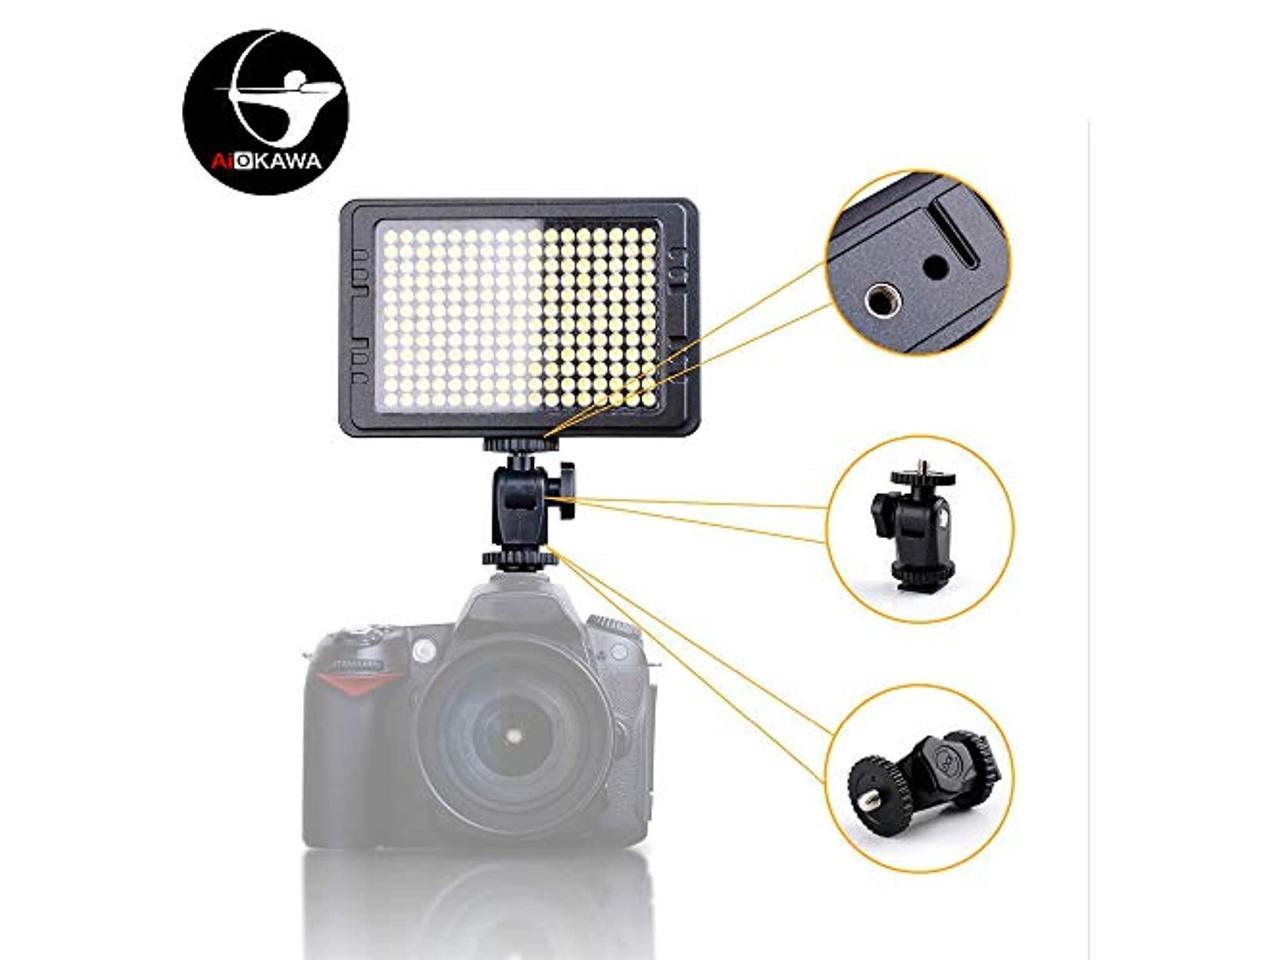 AIOKAWA Premium On Camera Video Light Photo Dimmable 204 LED Panel with 1/4 Thread for Canon Sony and Other DSLR Cameras Nikon Bi-Color 3200K-5600K Bright LED Fill Light 10 Year Warranty! 